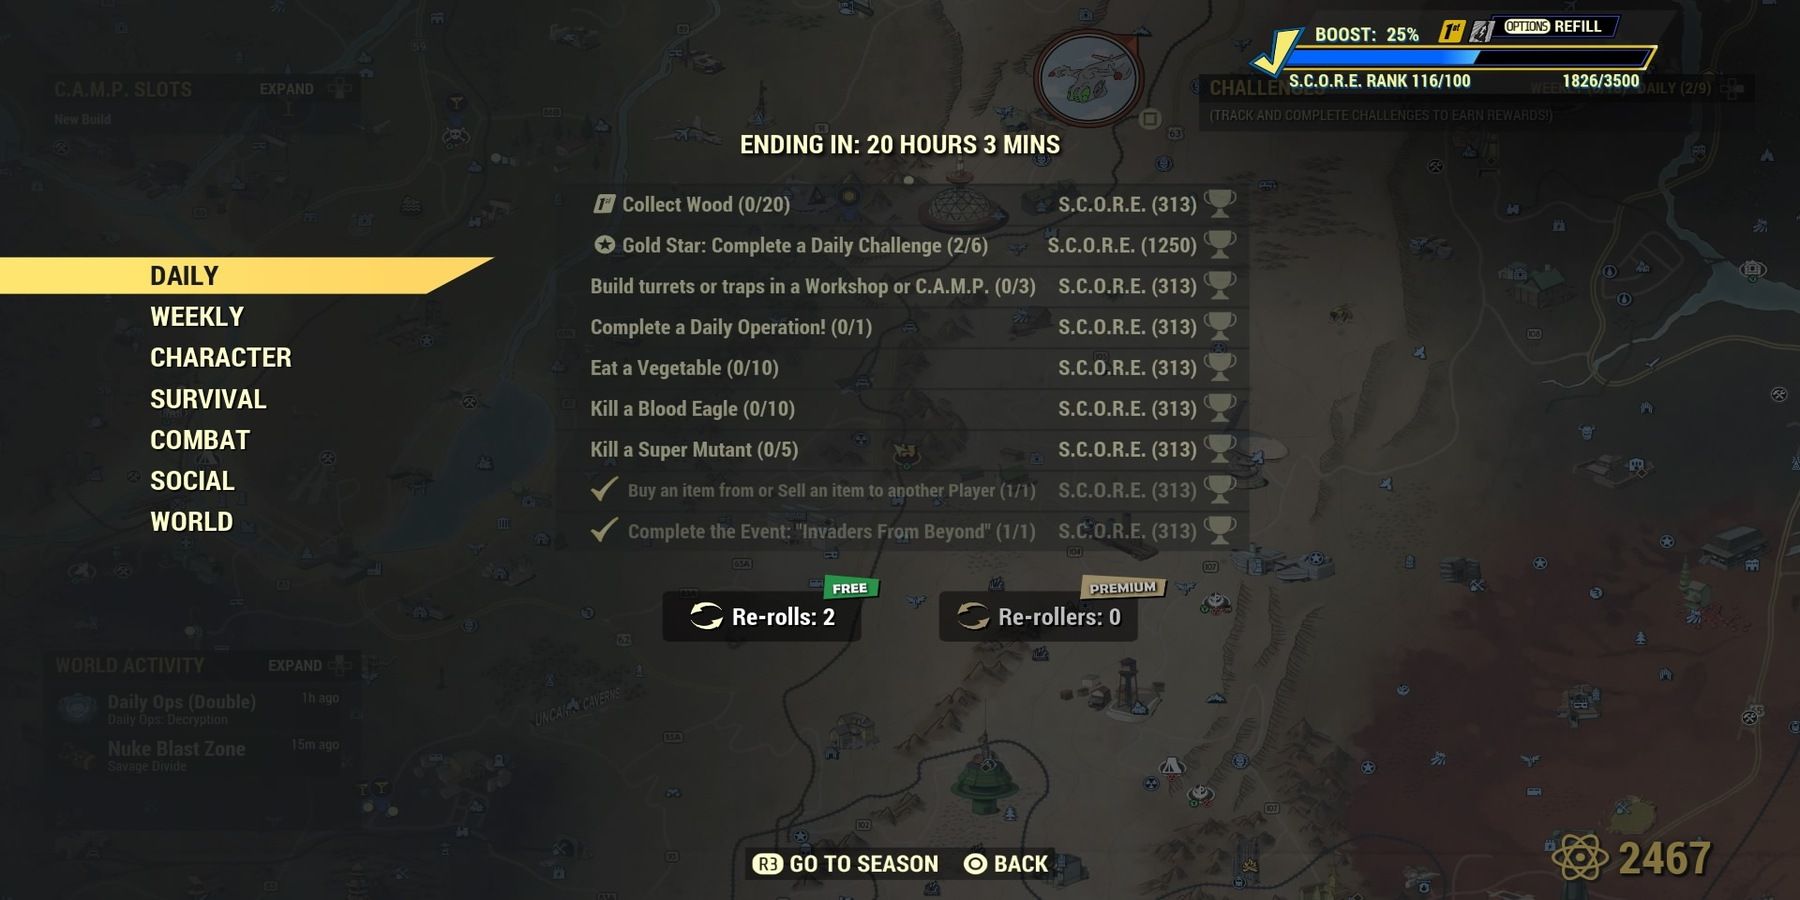 Daily Challenges in Fallout 76